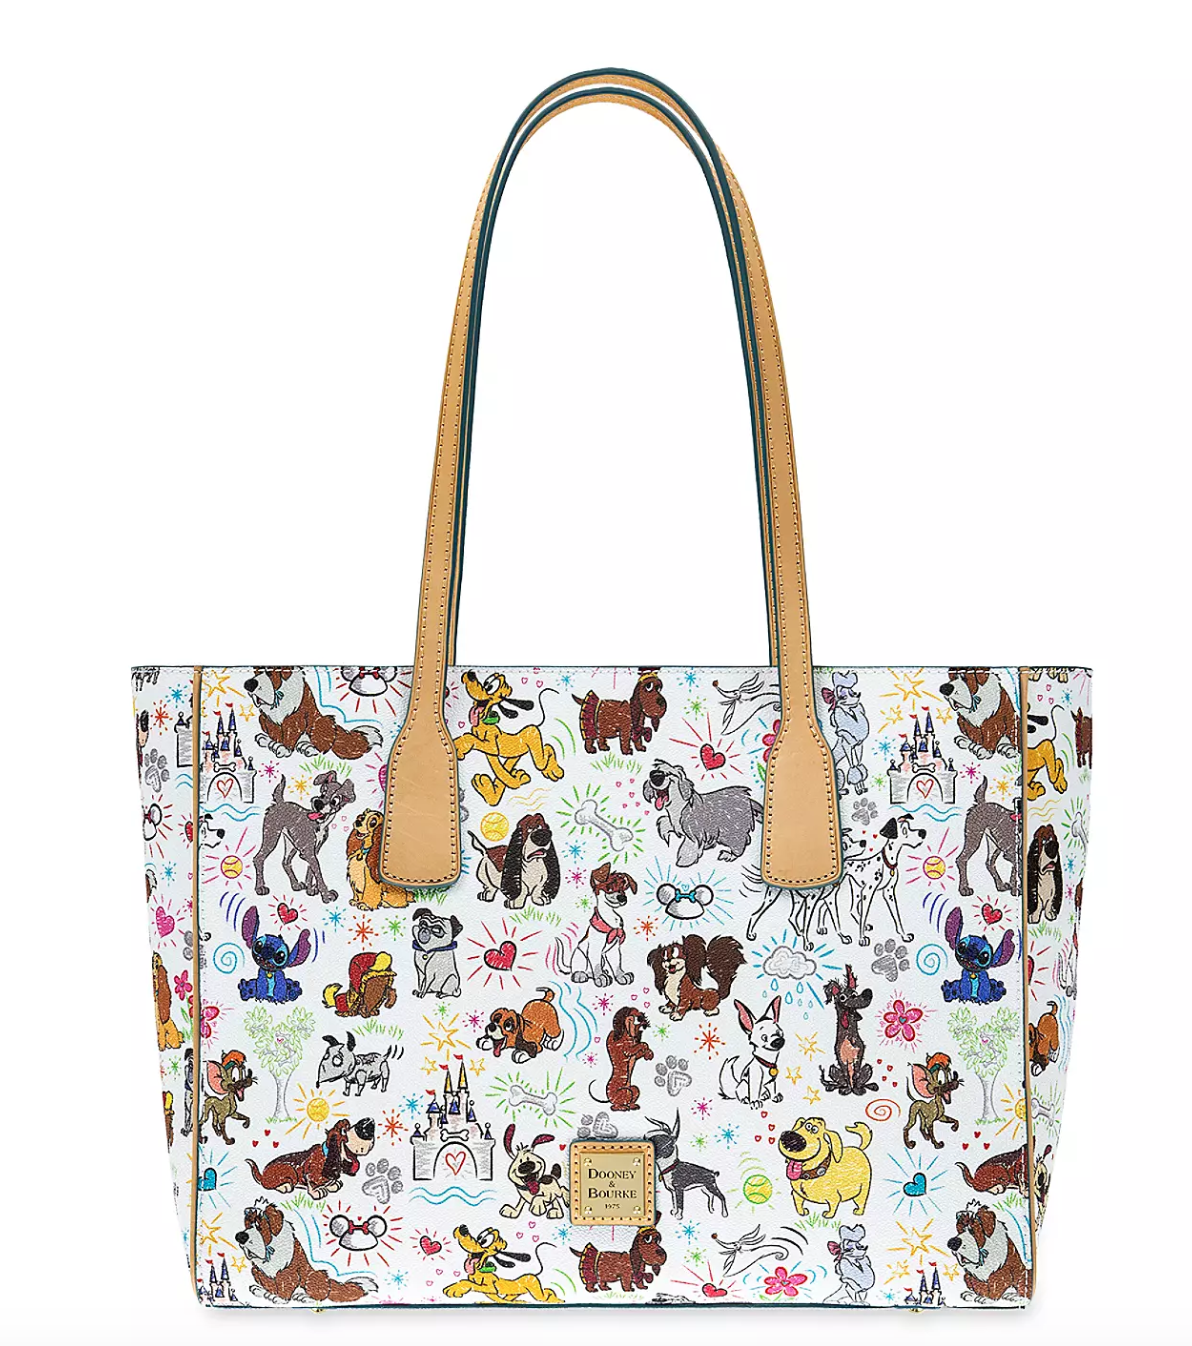 PHOTOS: This Dog-Themed Dooney & Bourke Collection at Disney World is  Selling FAST! - AllEars.Net